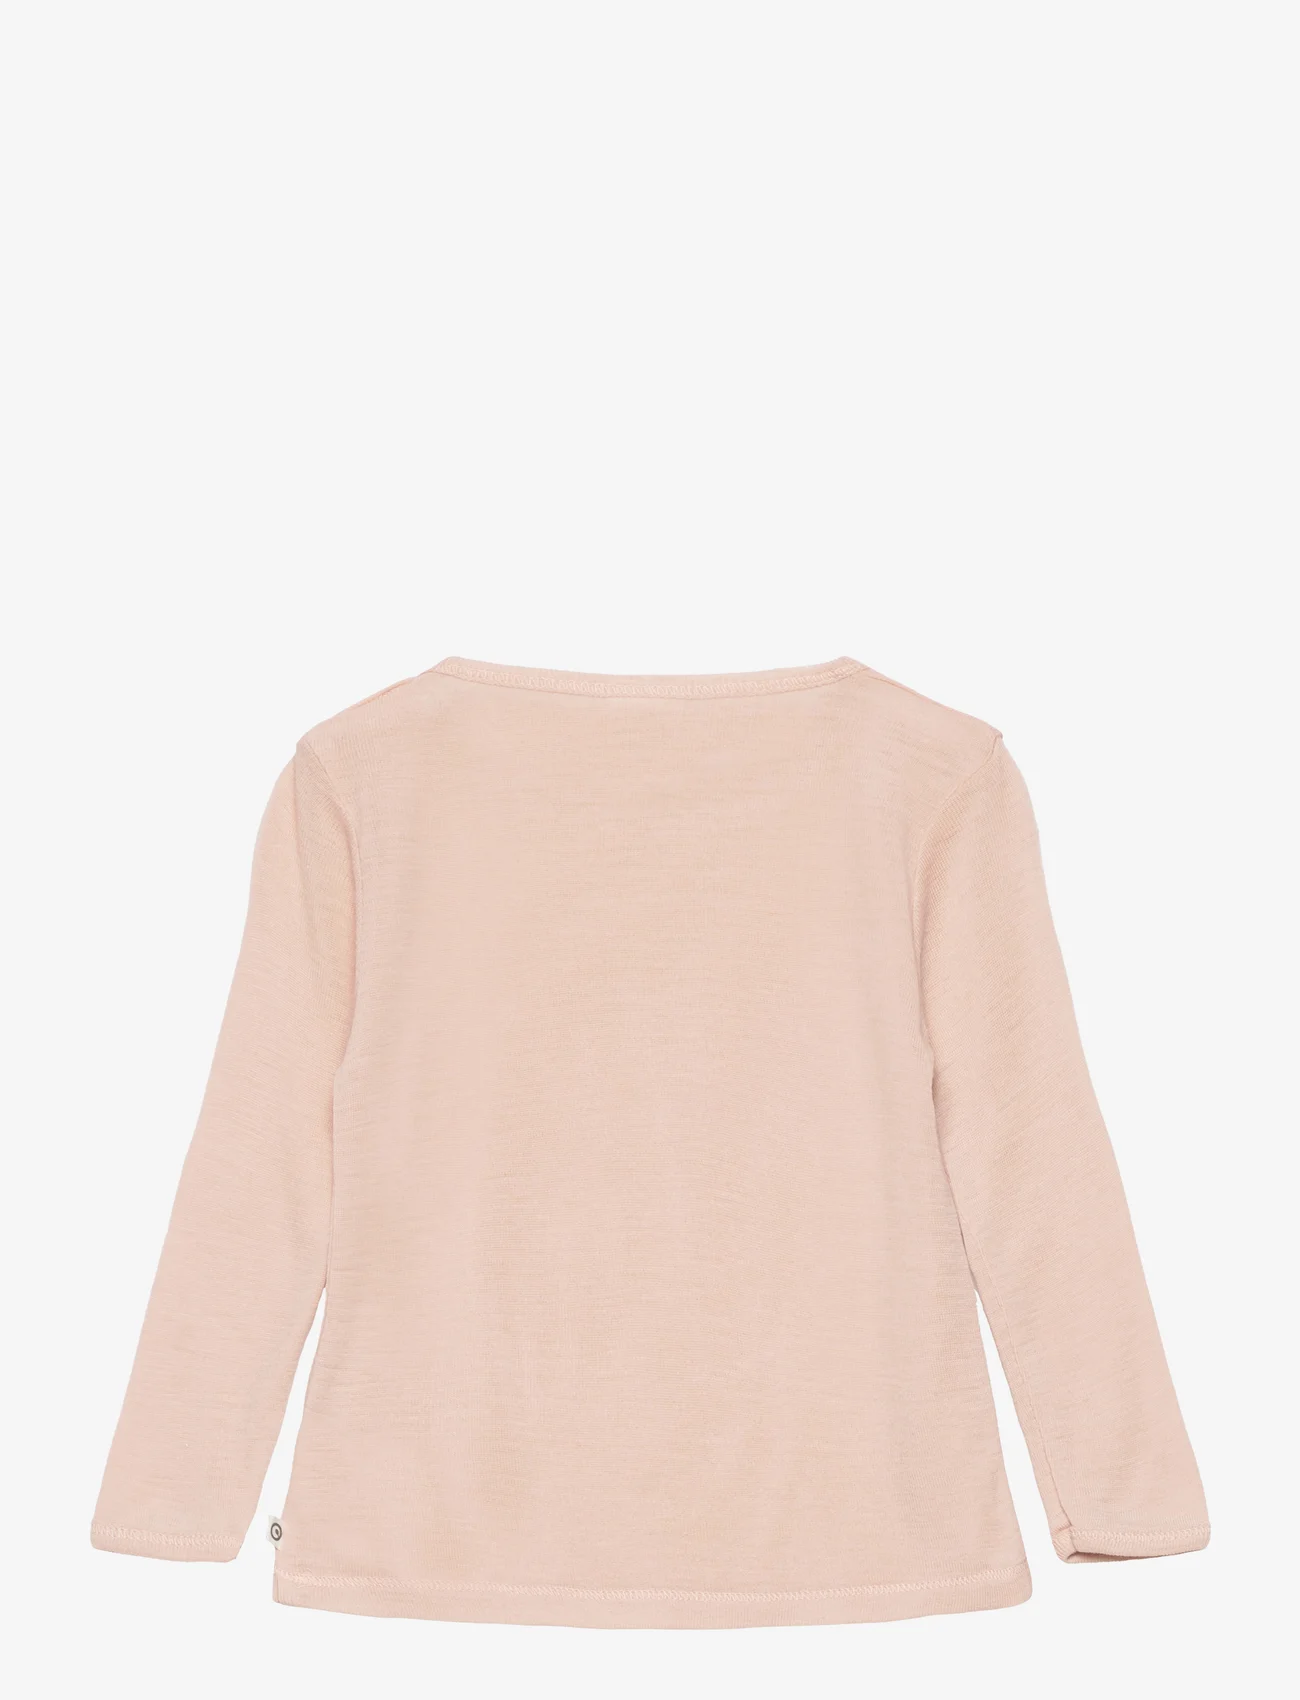 Müsli by Green Cotton - Woolly l/s T baby - madalaimad hinnad - spa rose - 1